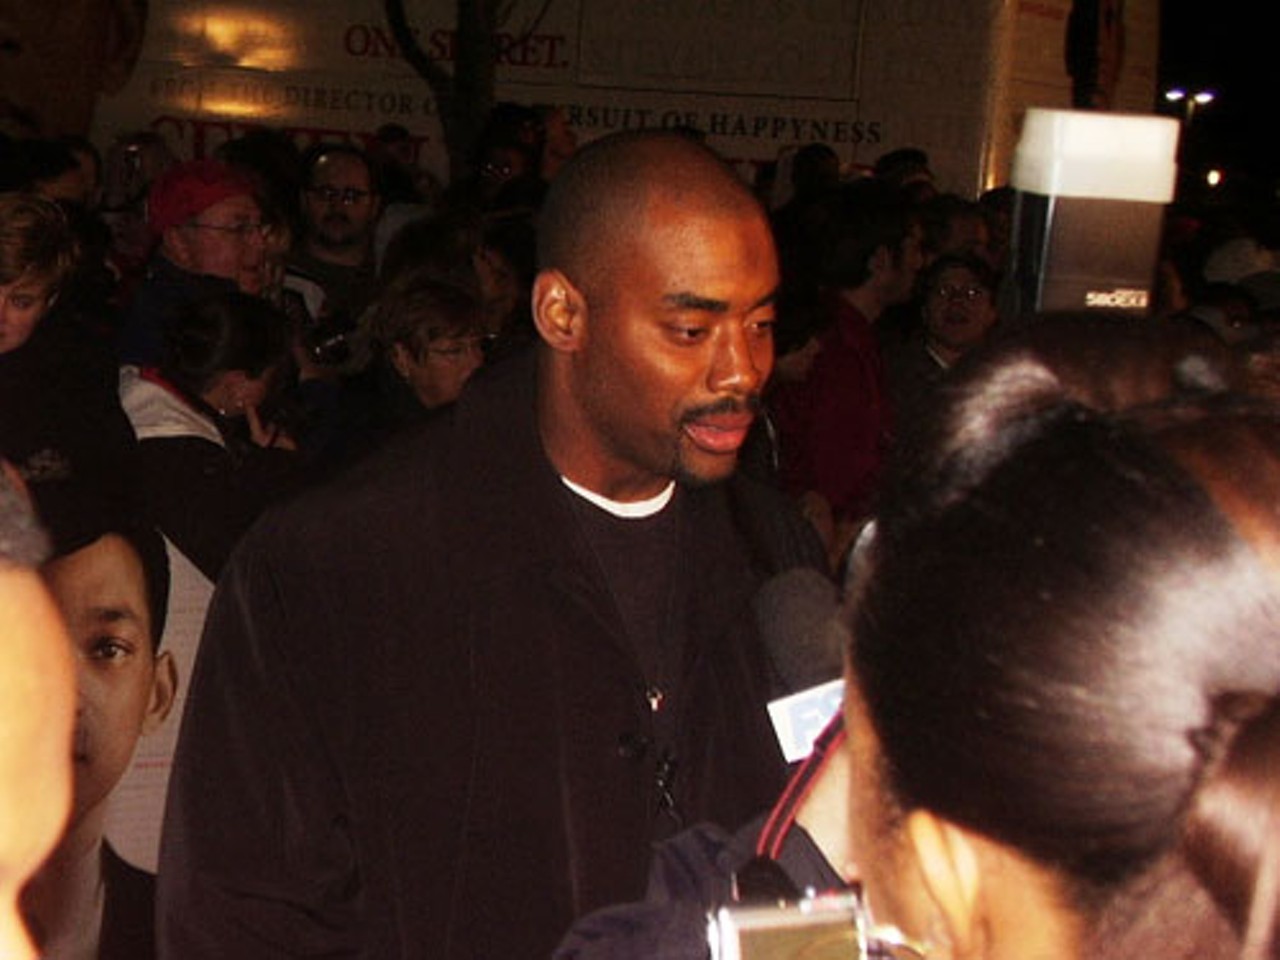 St. Louis Rams linebacker Chris Draft said to the press that he supported  the charitable aspects of the event.